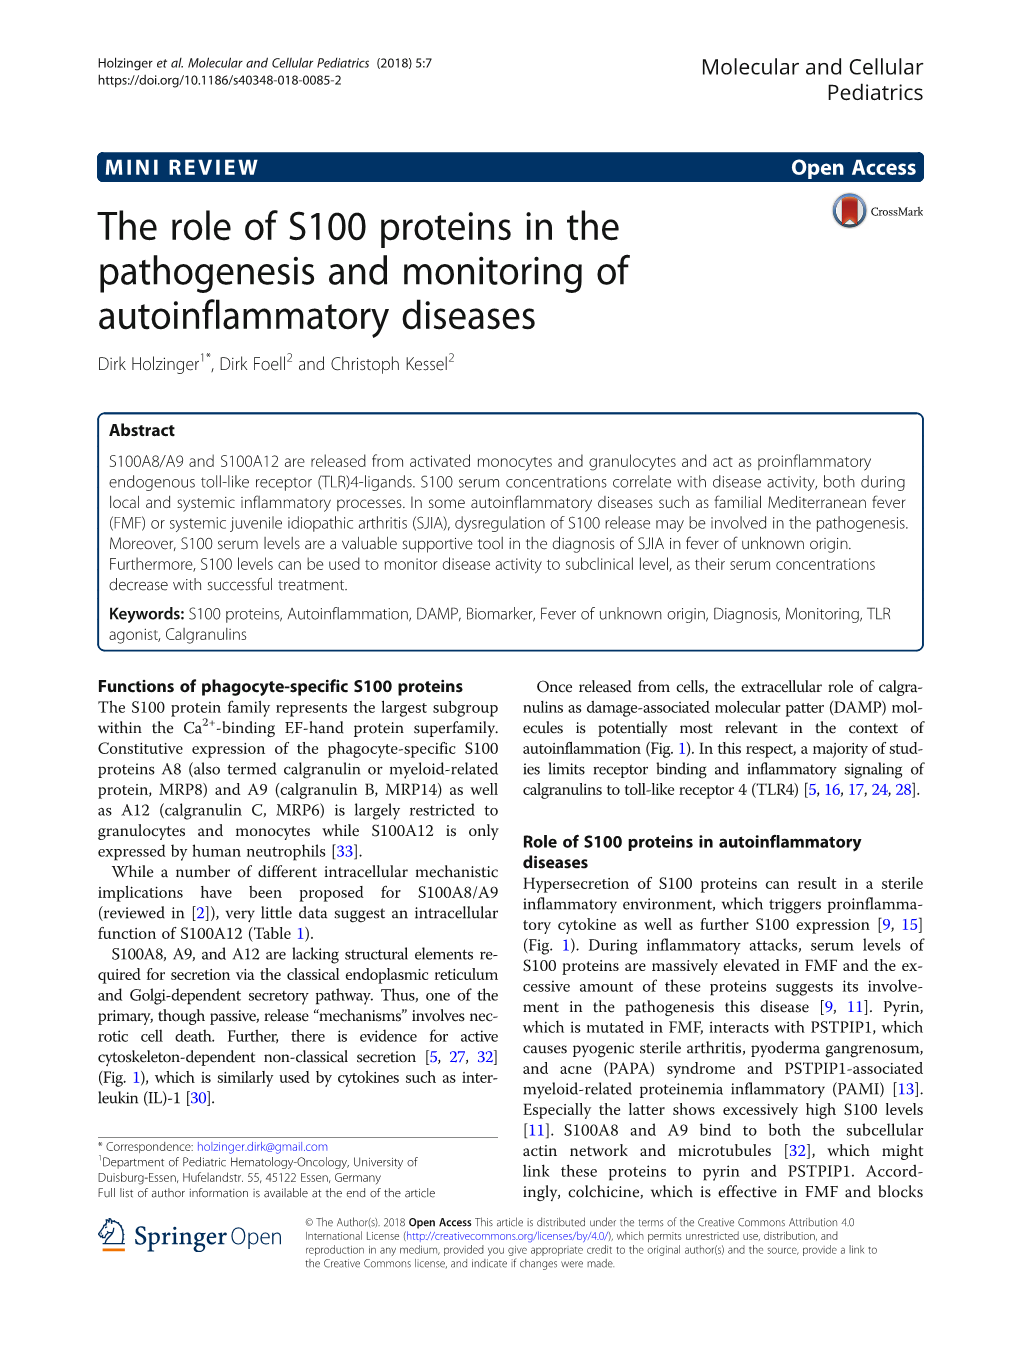 The Role of S100 Proteins in the Pathogenesis and Monitoring of Autoinflammatory Diseases Dirk Holzinger1*, Dirk Foell2 and Christoph Kessel2